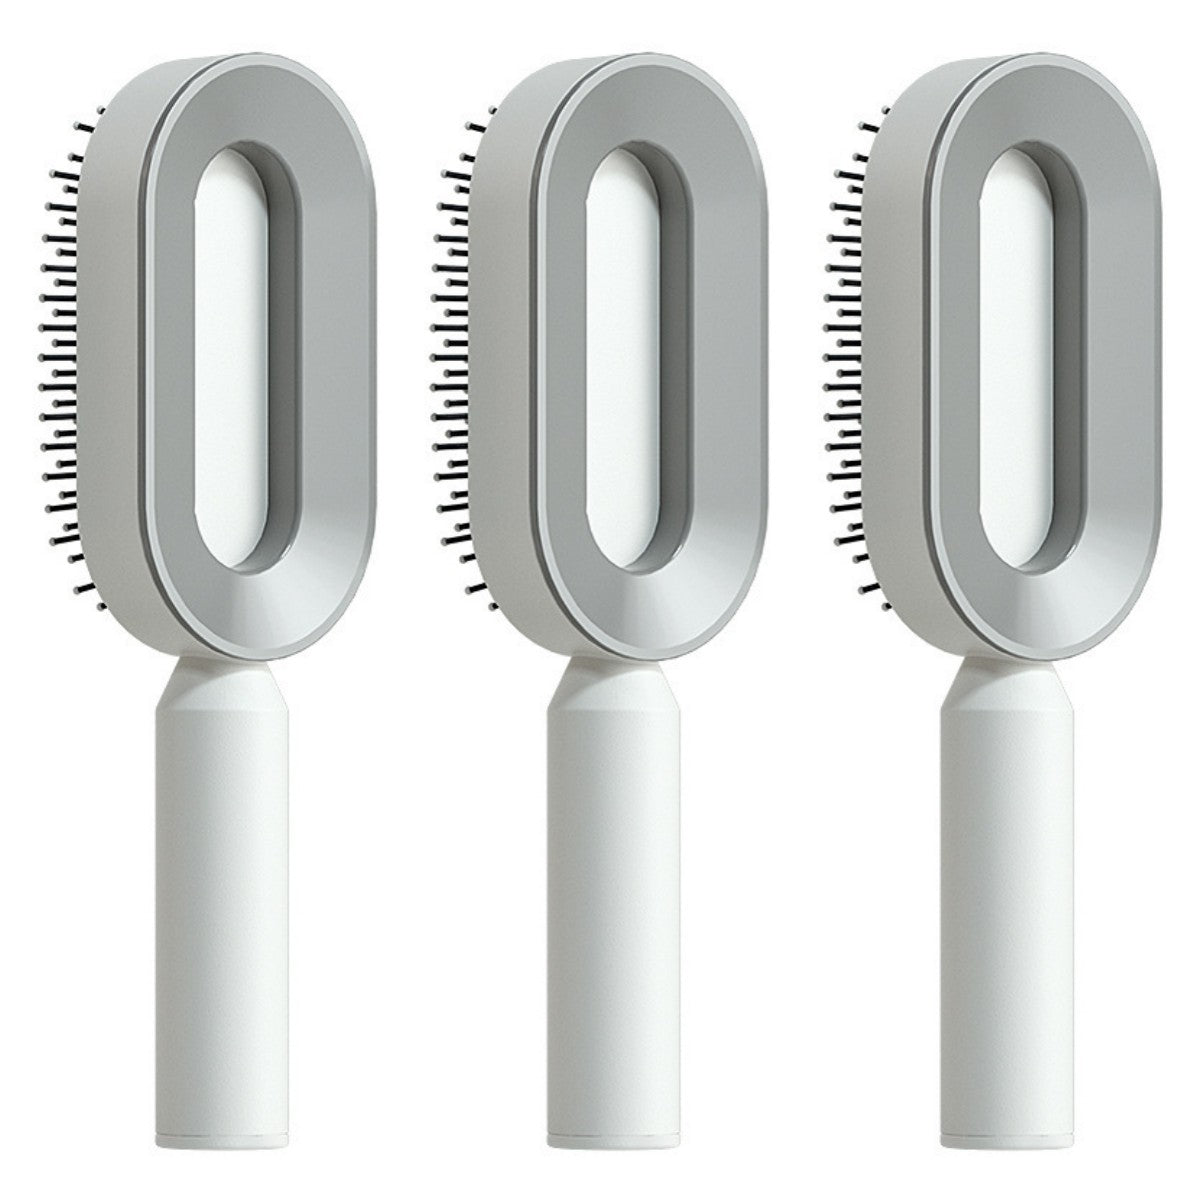 Self Cleaning Hair Brush For Women One-key Cleaning Hair Loss Airbag Massage Scalp Comb Anti-Static Hairbrush Set R